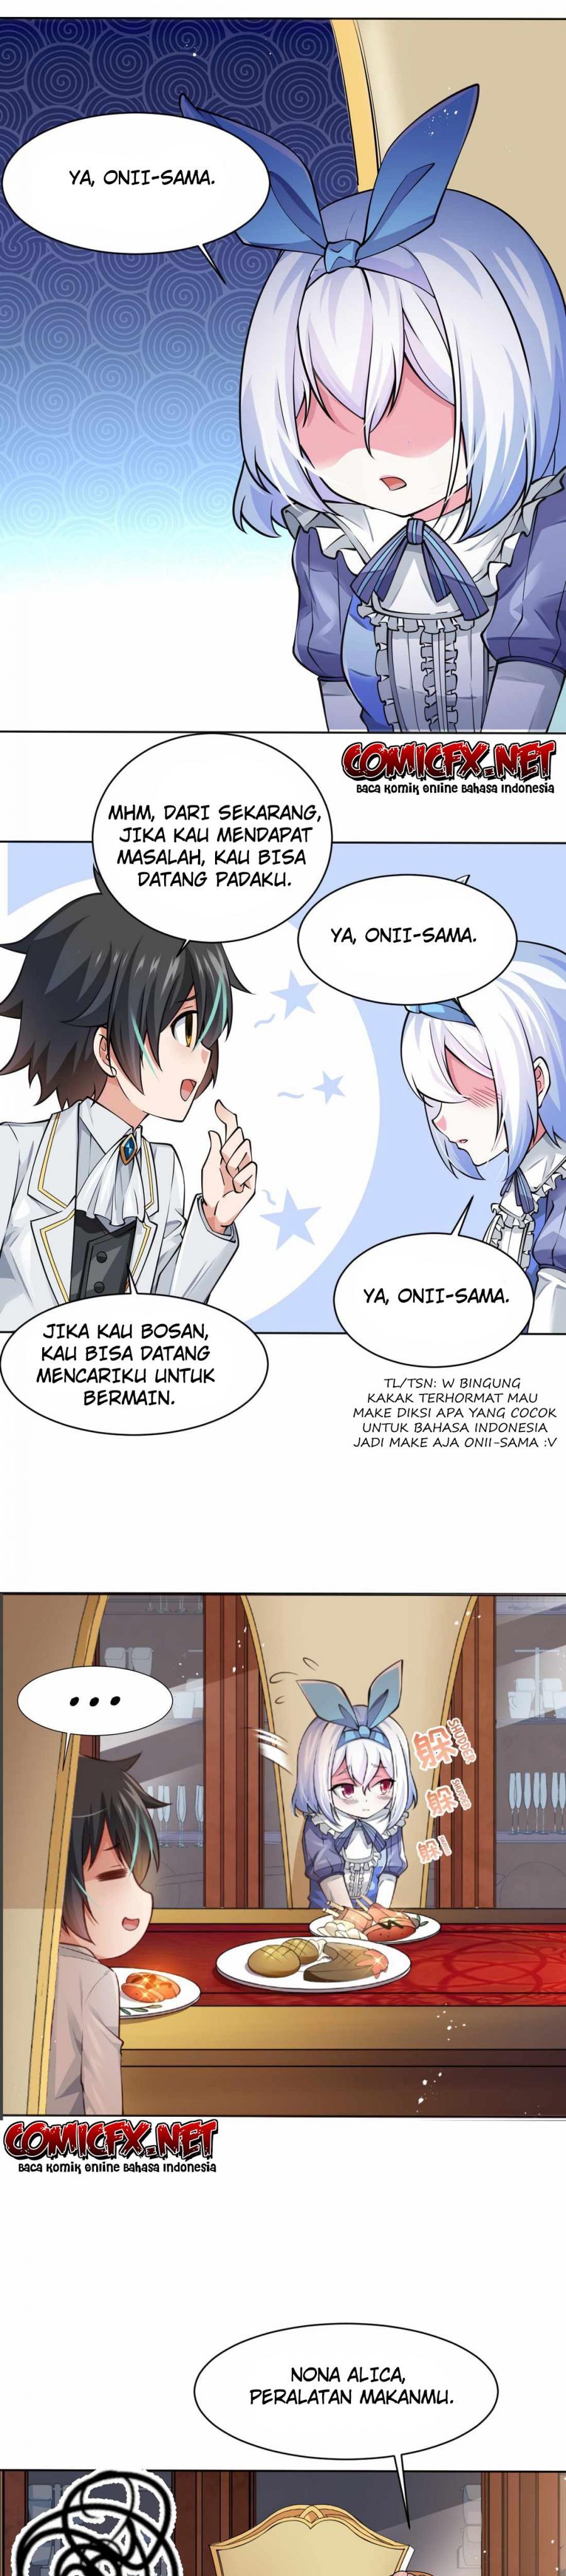 Dilarang COPAS - situs resmi www.mangacanblog.com - Komik little tyrant doesnt want to meet with a bad end 002 - chapter 2 3 Indonesia little tyrant doesnt want to meet with a bad end 002 - chapter 2 Terbaru 4|Baca Manga Komik Indonesia|Mangacan